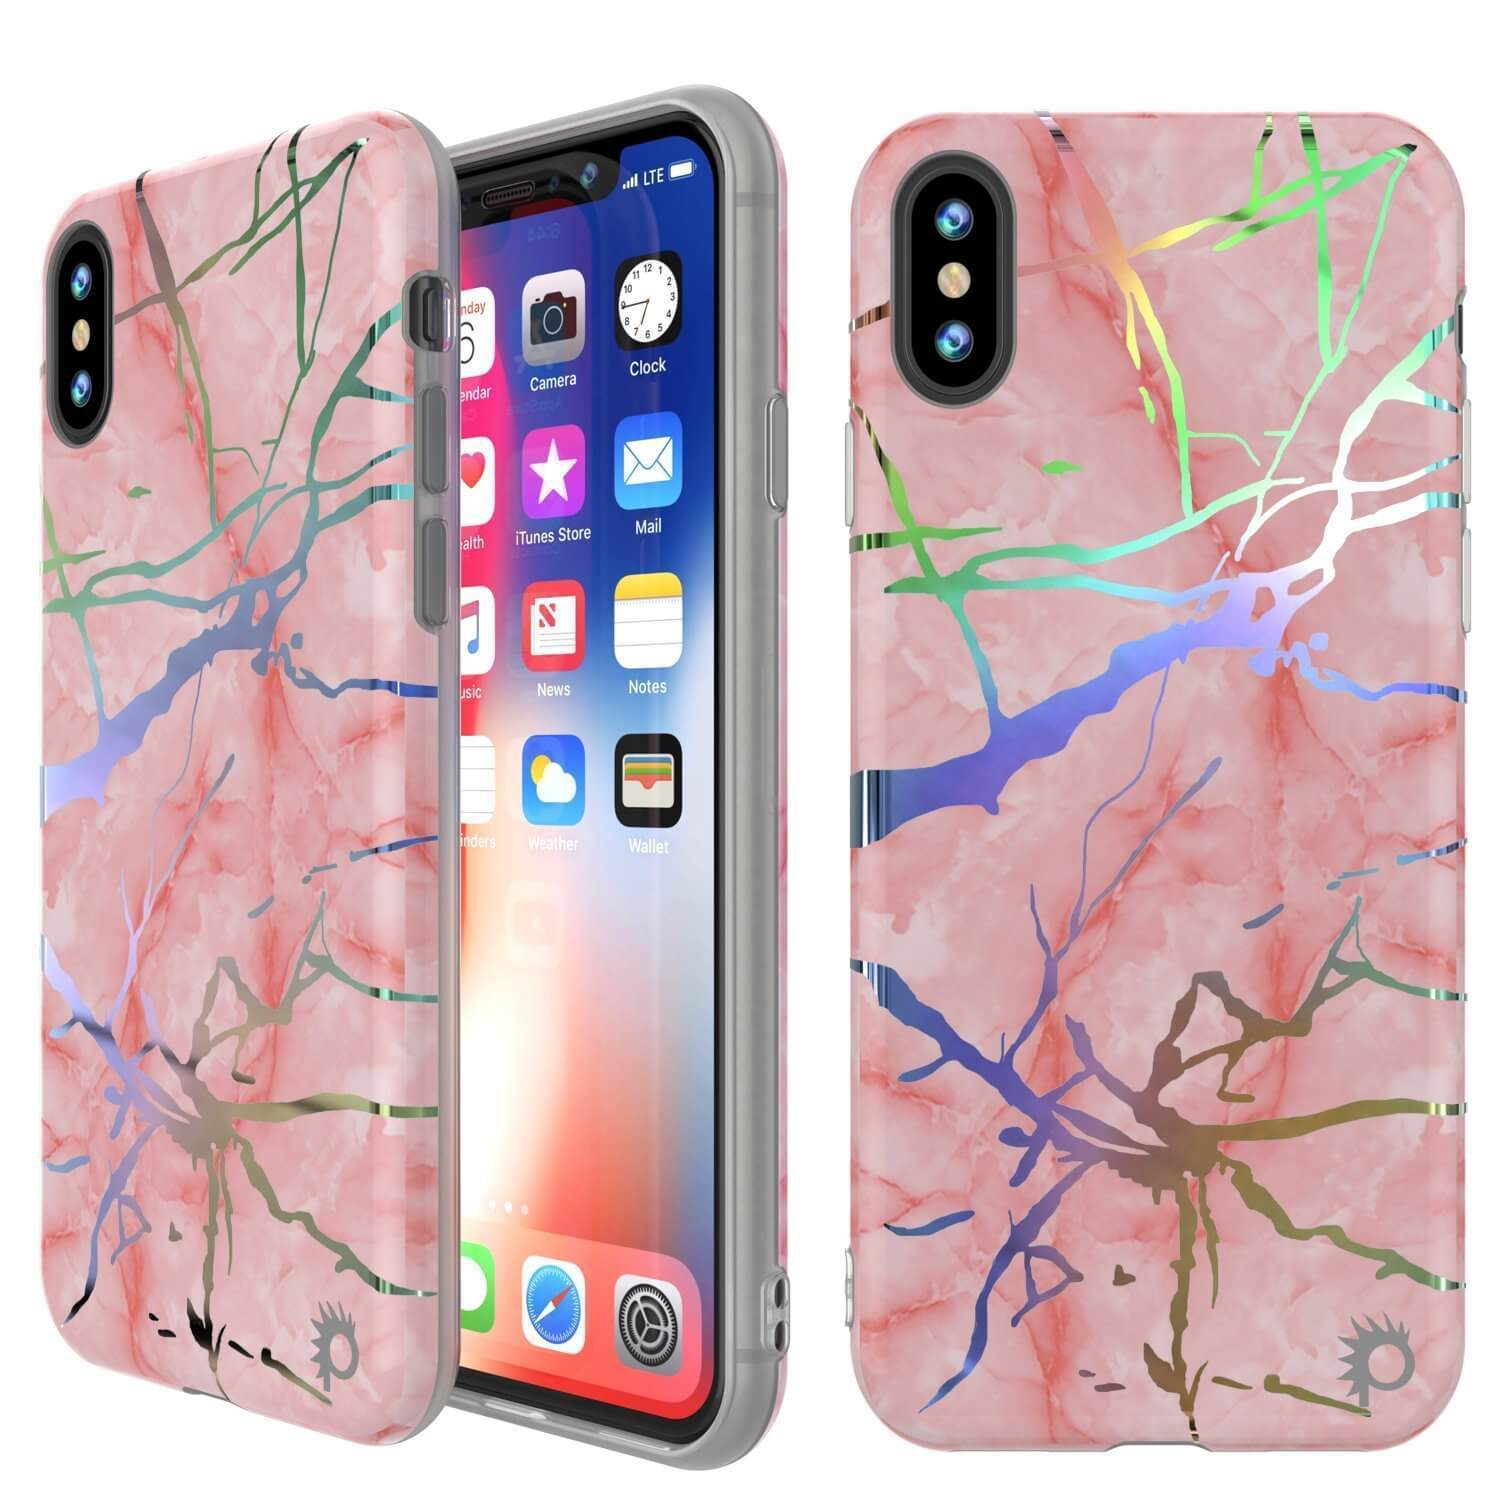 Punkcase iPhone XS Max Marble Case, Protective Full Body Cover W/9H Tempered Glass Screen Protector (Rose Gold Mirage)